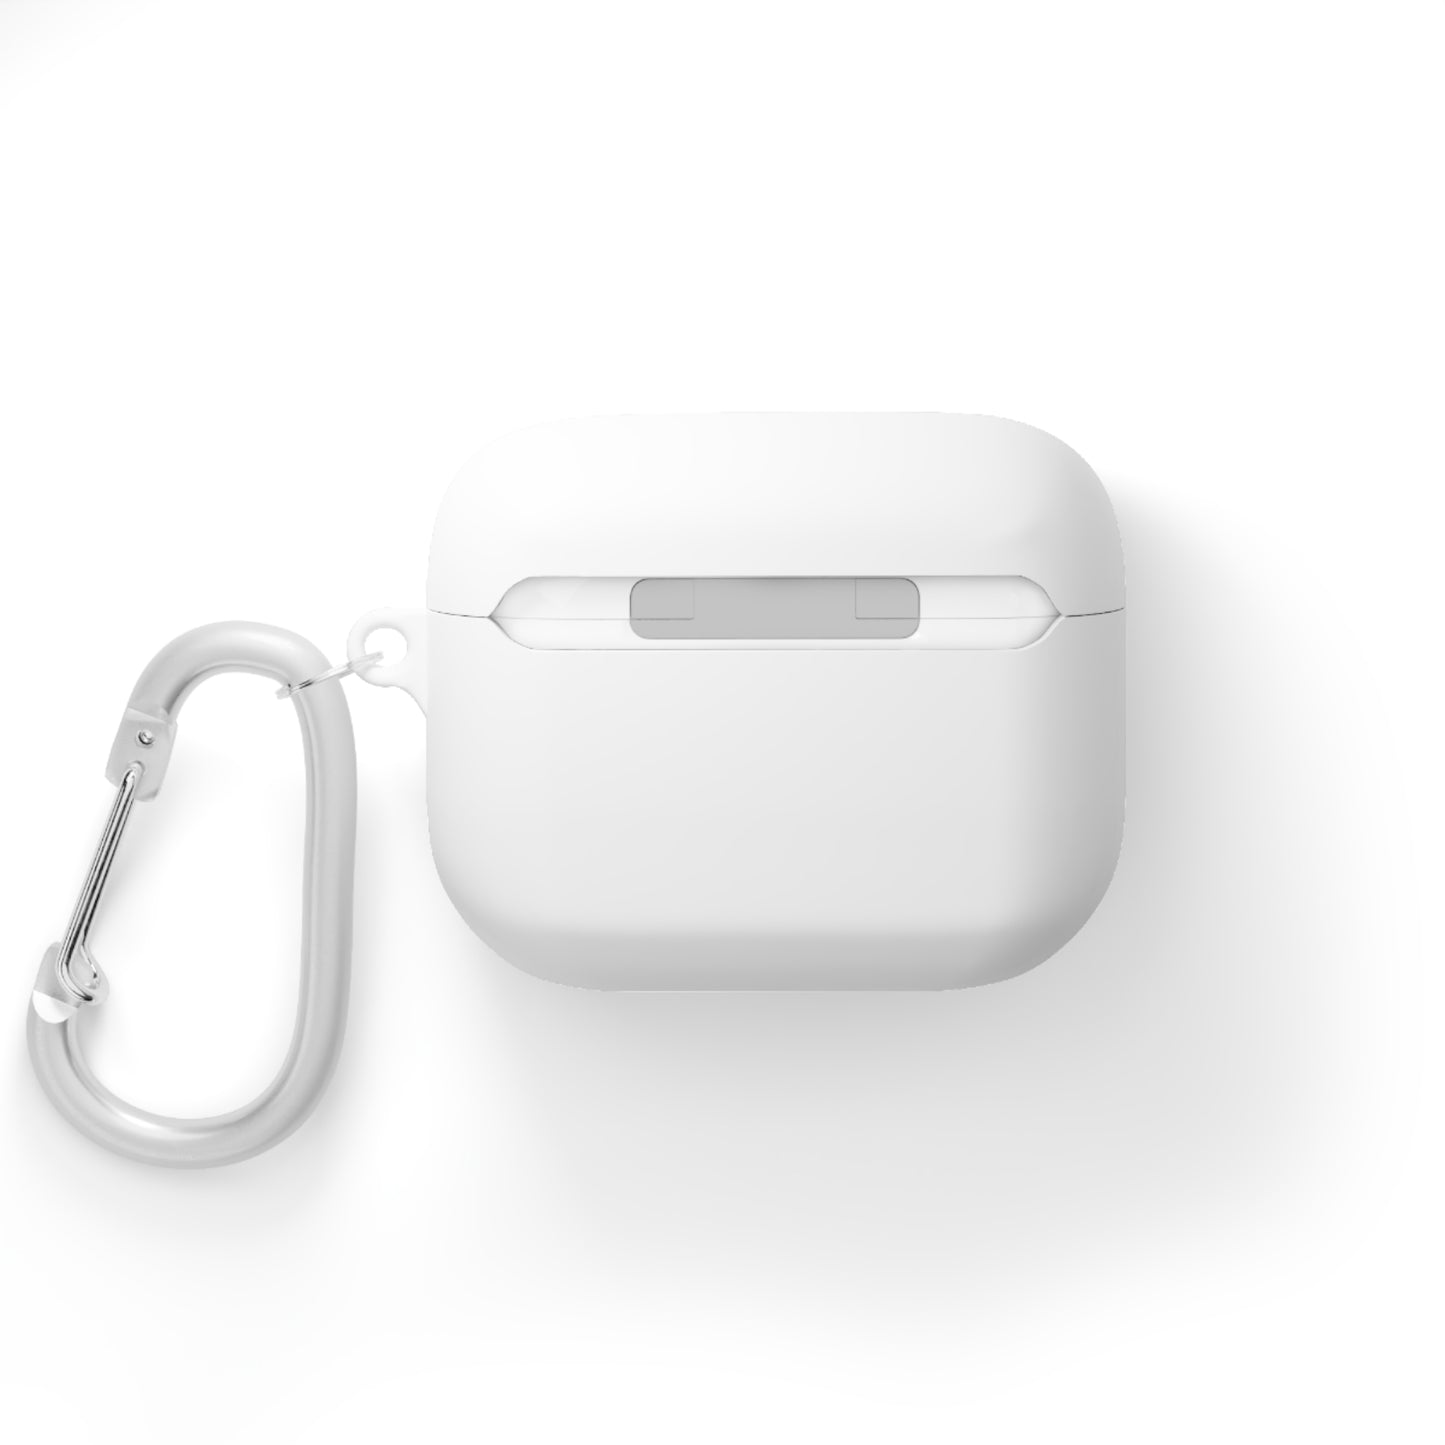 Vairo AirPods and AirPods Pro Case Cover